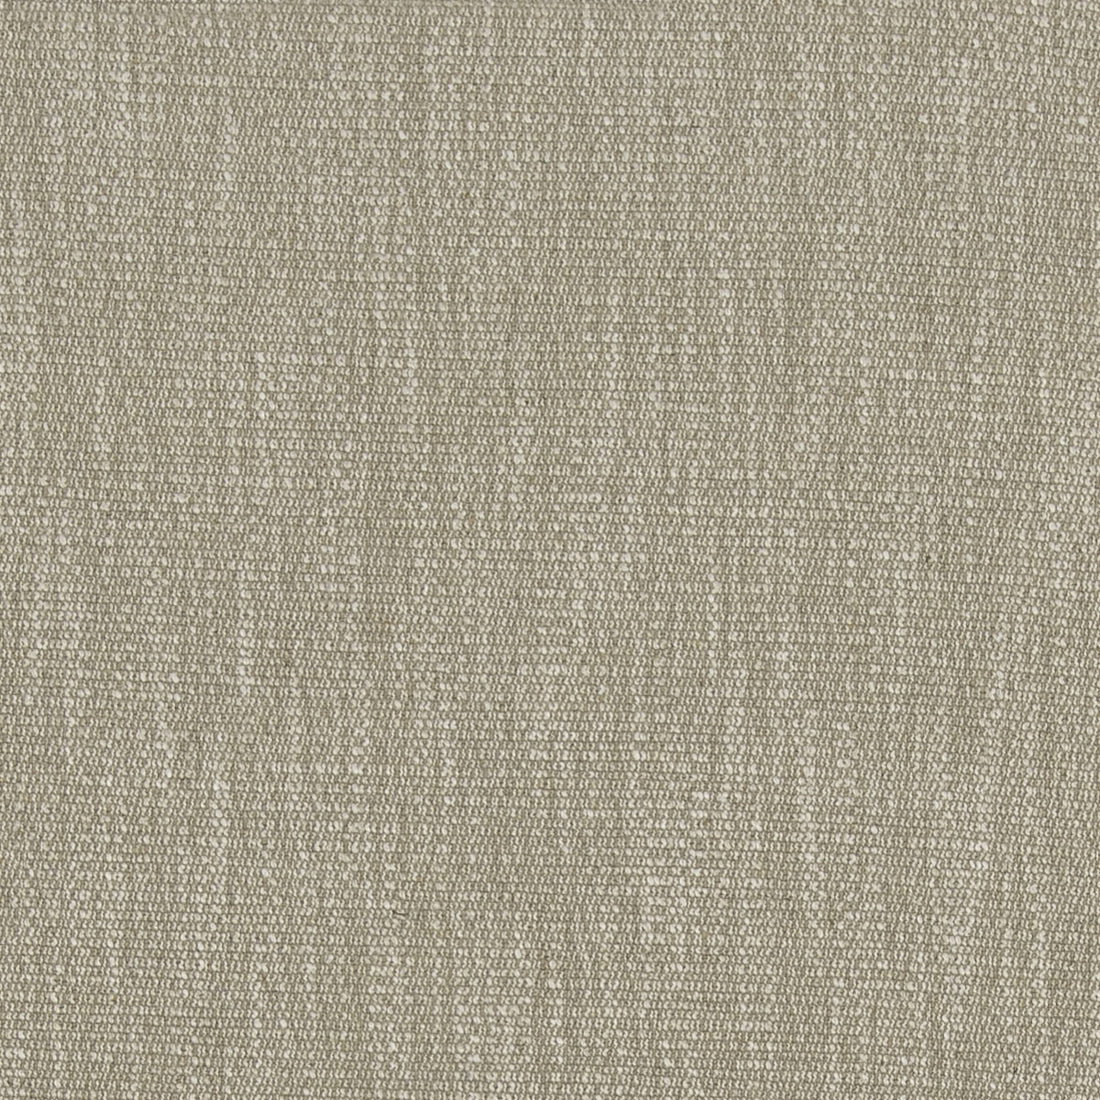 Kochi fabric in linen color - pattern ED85367.110.0 - by Threads in the Quintessential Textures collection